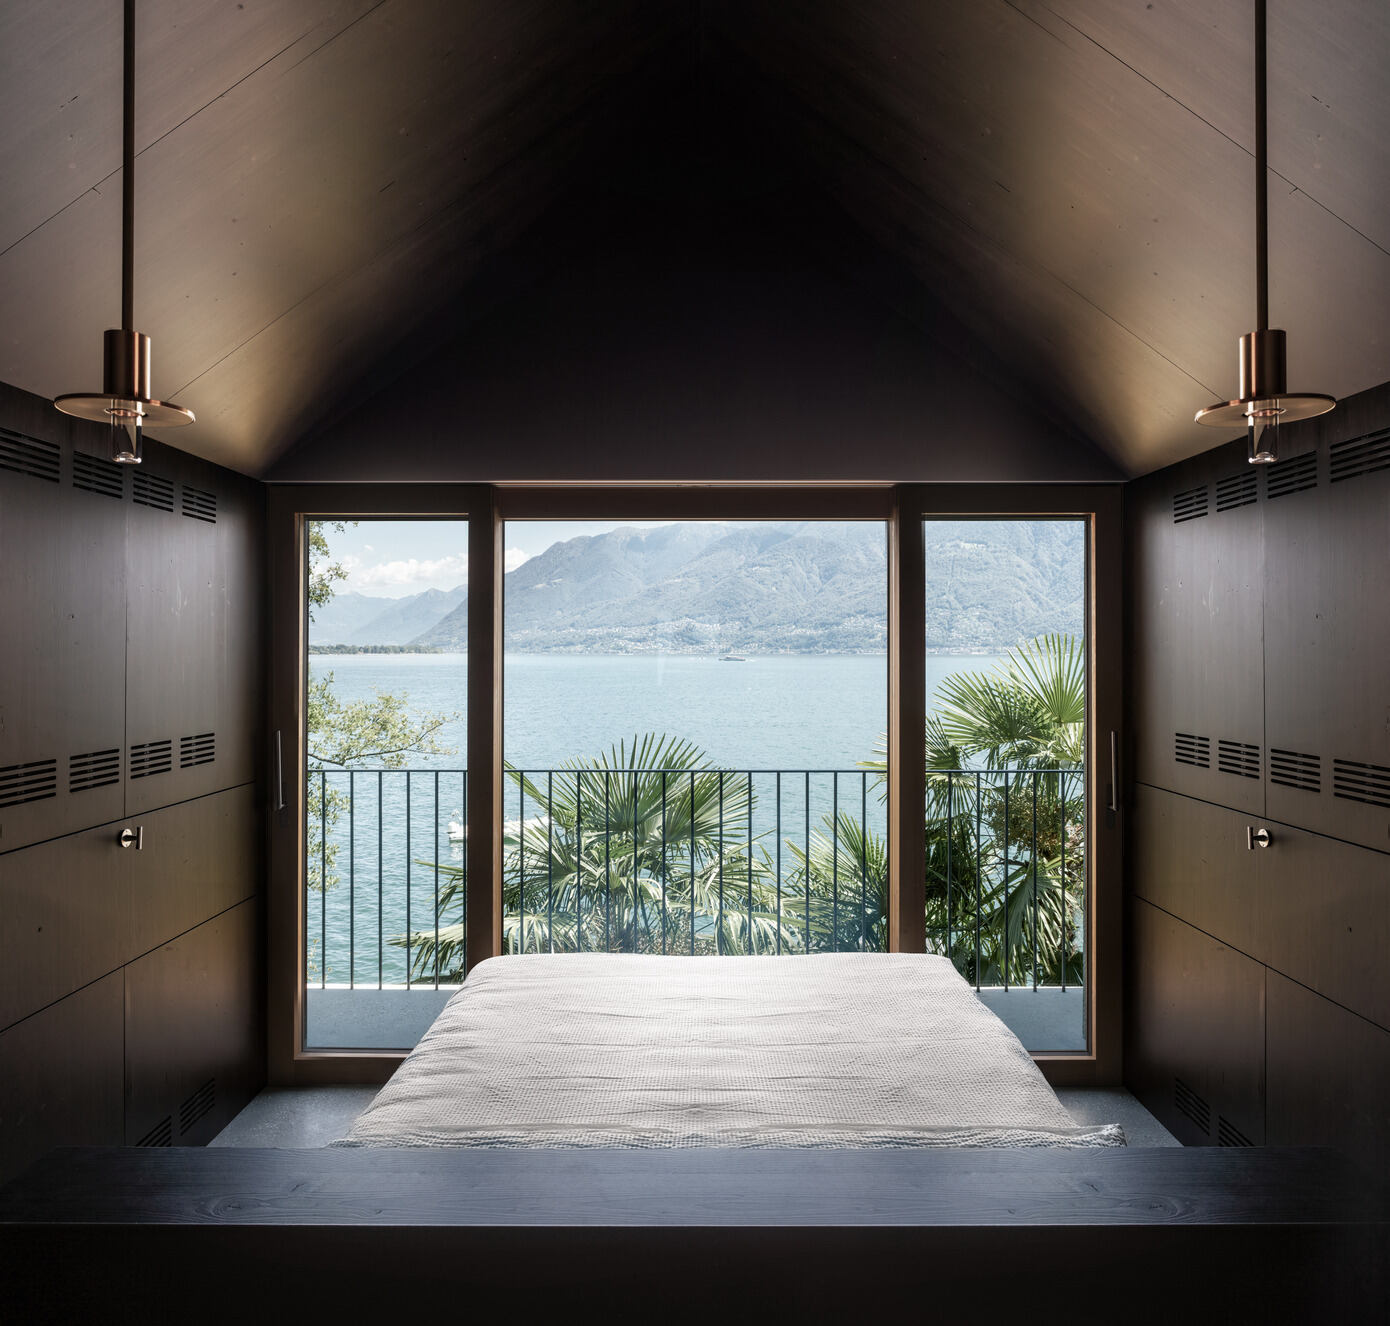 Casa Campari: A Lakeside Beauty in Switzerland with Unparalleled Views